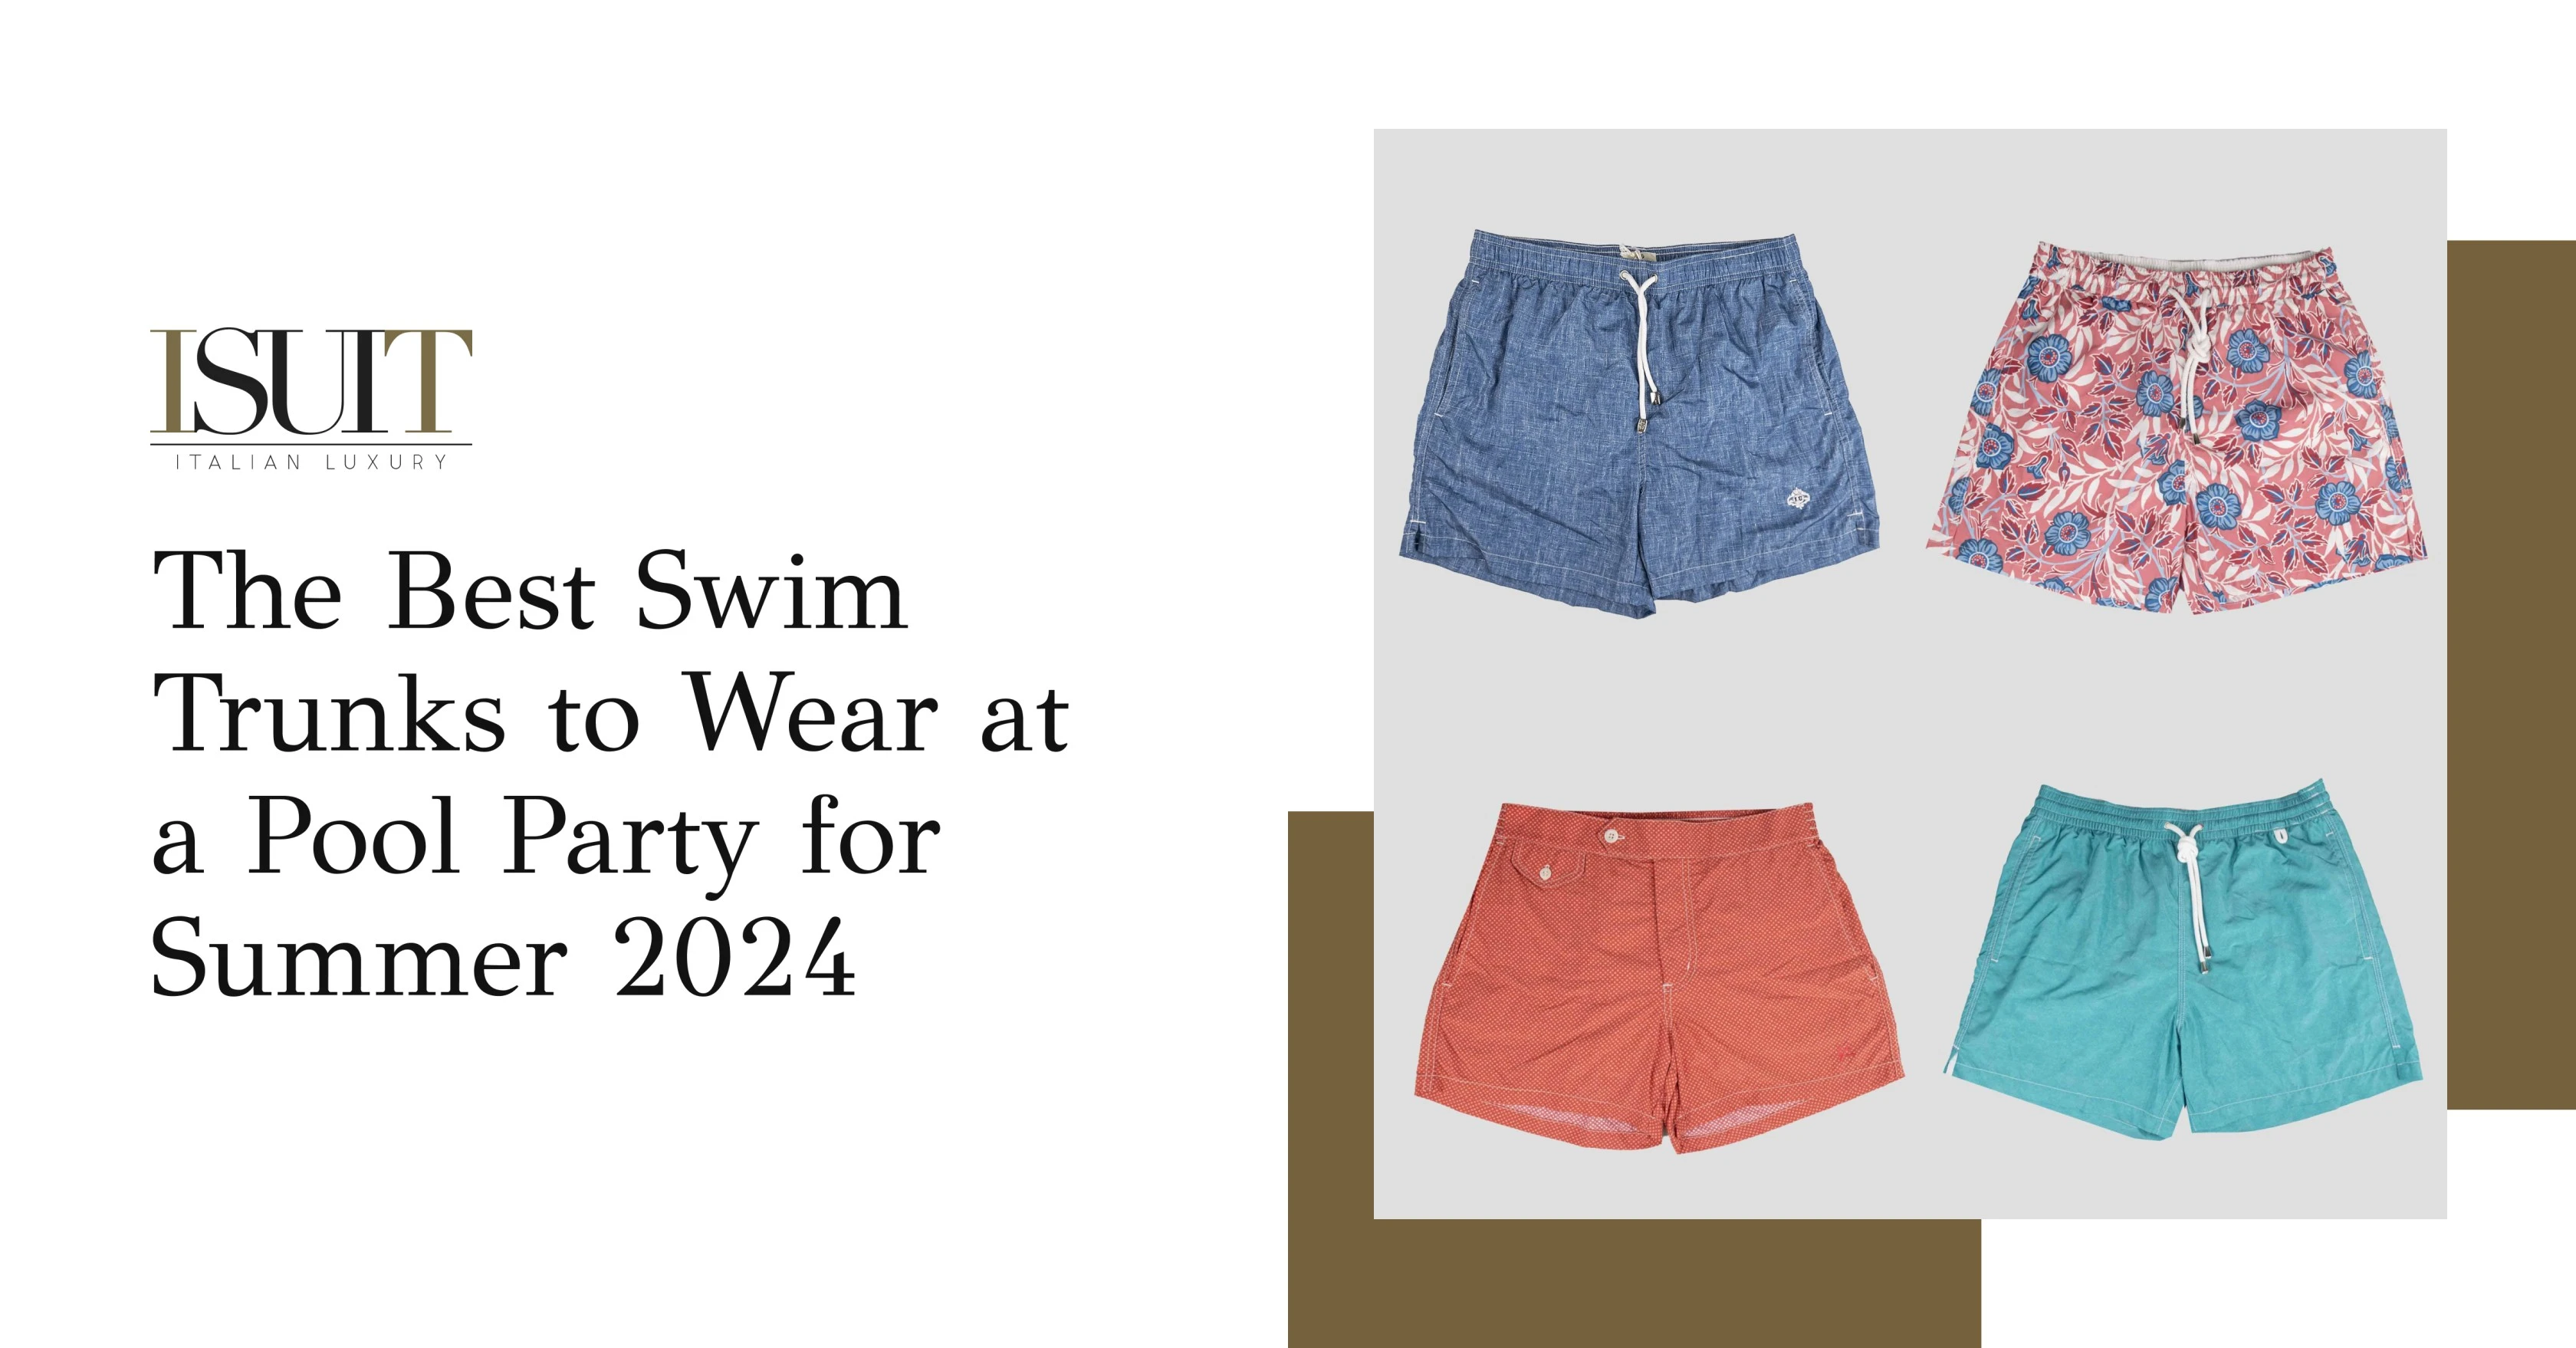  The Best Swim Trunks to Wear at a Pool Party for Summer 2024